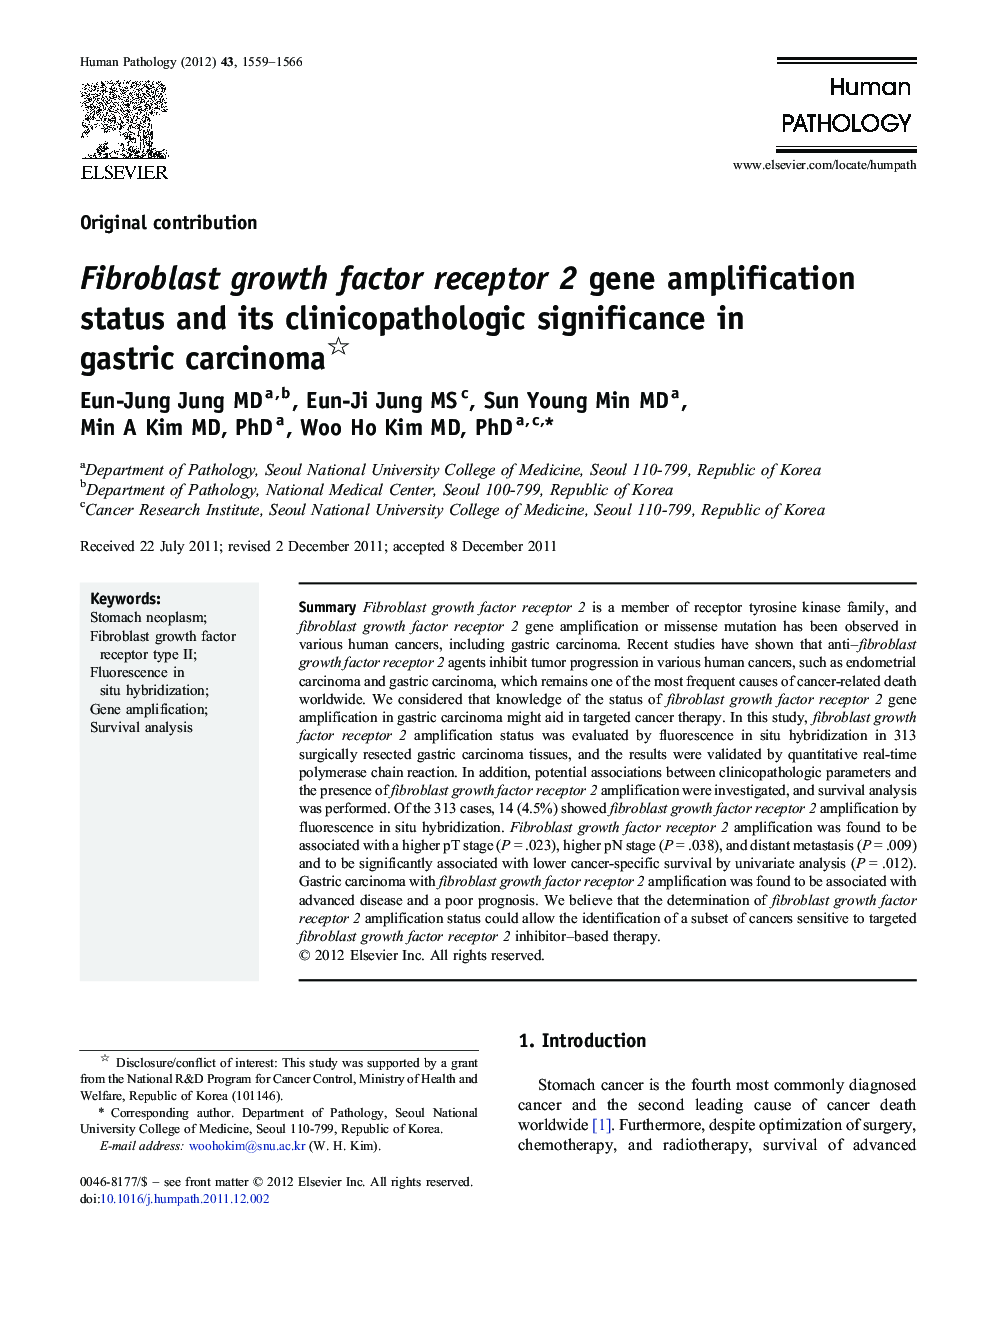 Fibroblast growth factor receptor 2 gene amplification status and its clinicopathologic significance in gastric carcinoma 